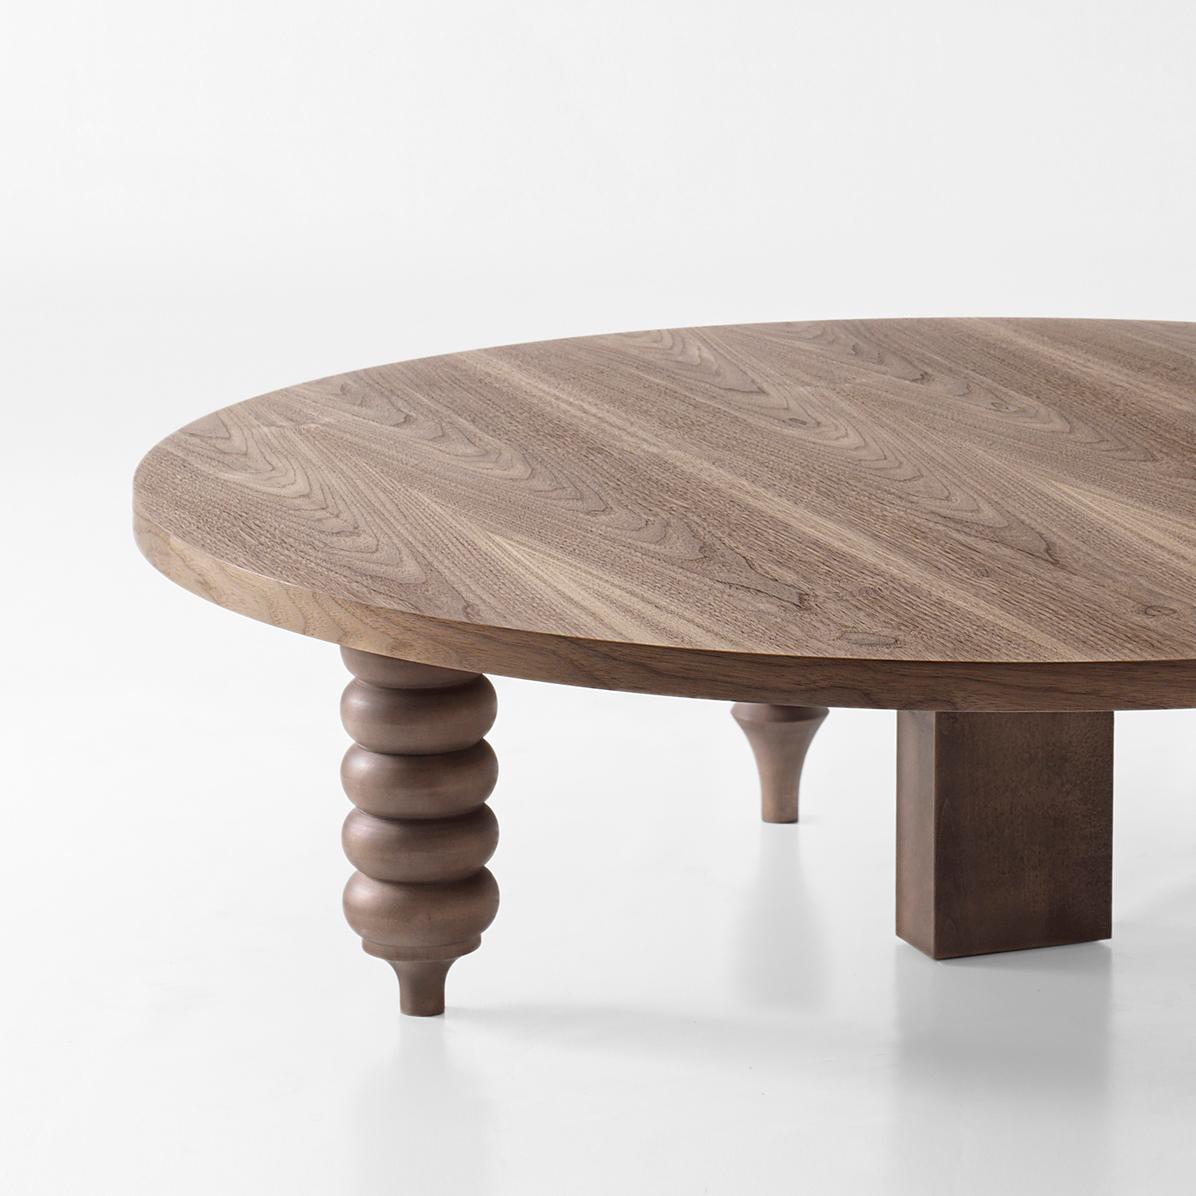 Low table designed by Jaime Hayon manufactured in Barcelona by BD

MDF base and legs in turned solid alder wood, 

Measures: Rounded table:
Ø 80/120 x H 35 cm.